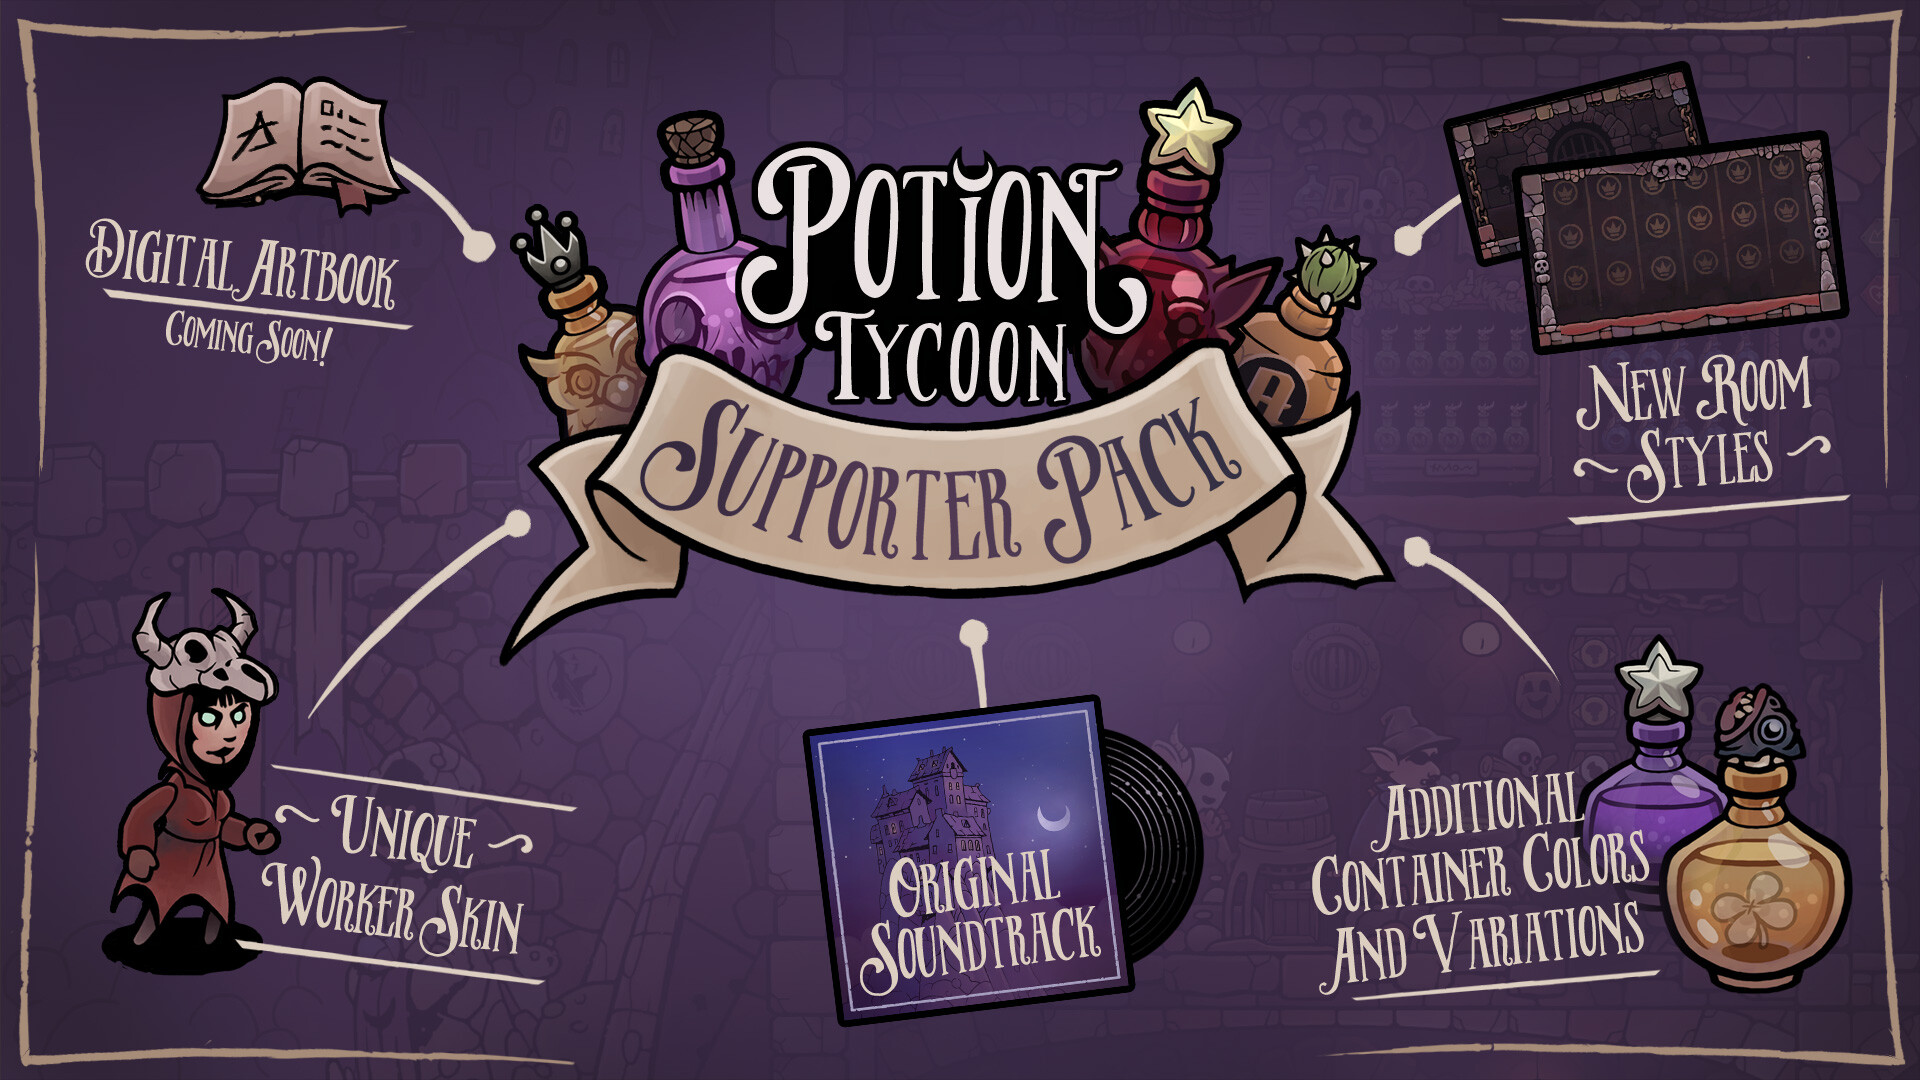 (7.88$) Potion Tycoon - Supporter Pack DLC Steam CD Key